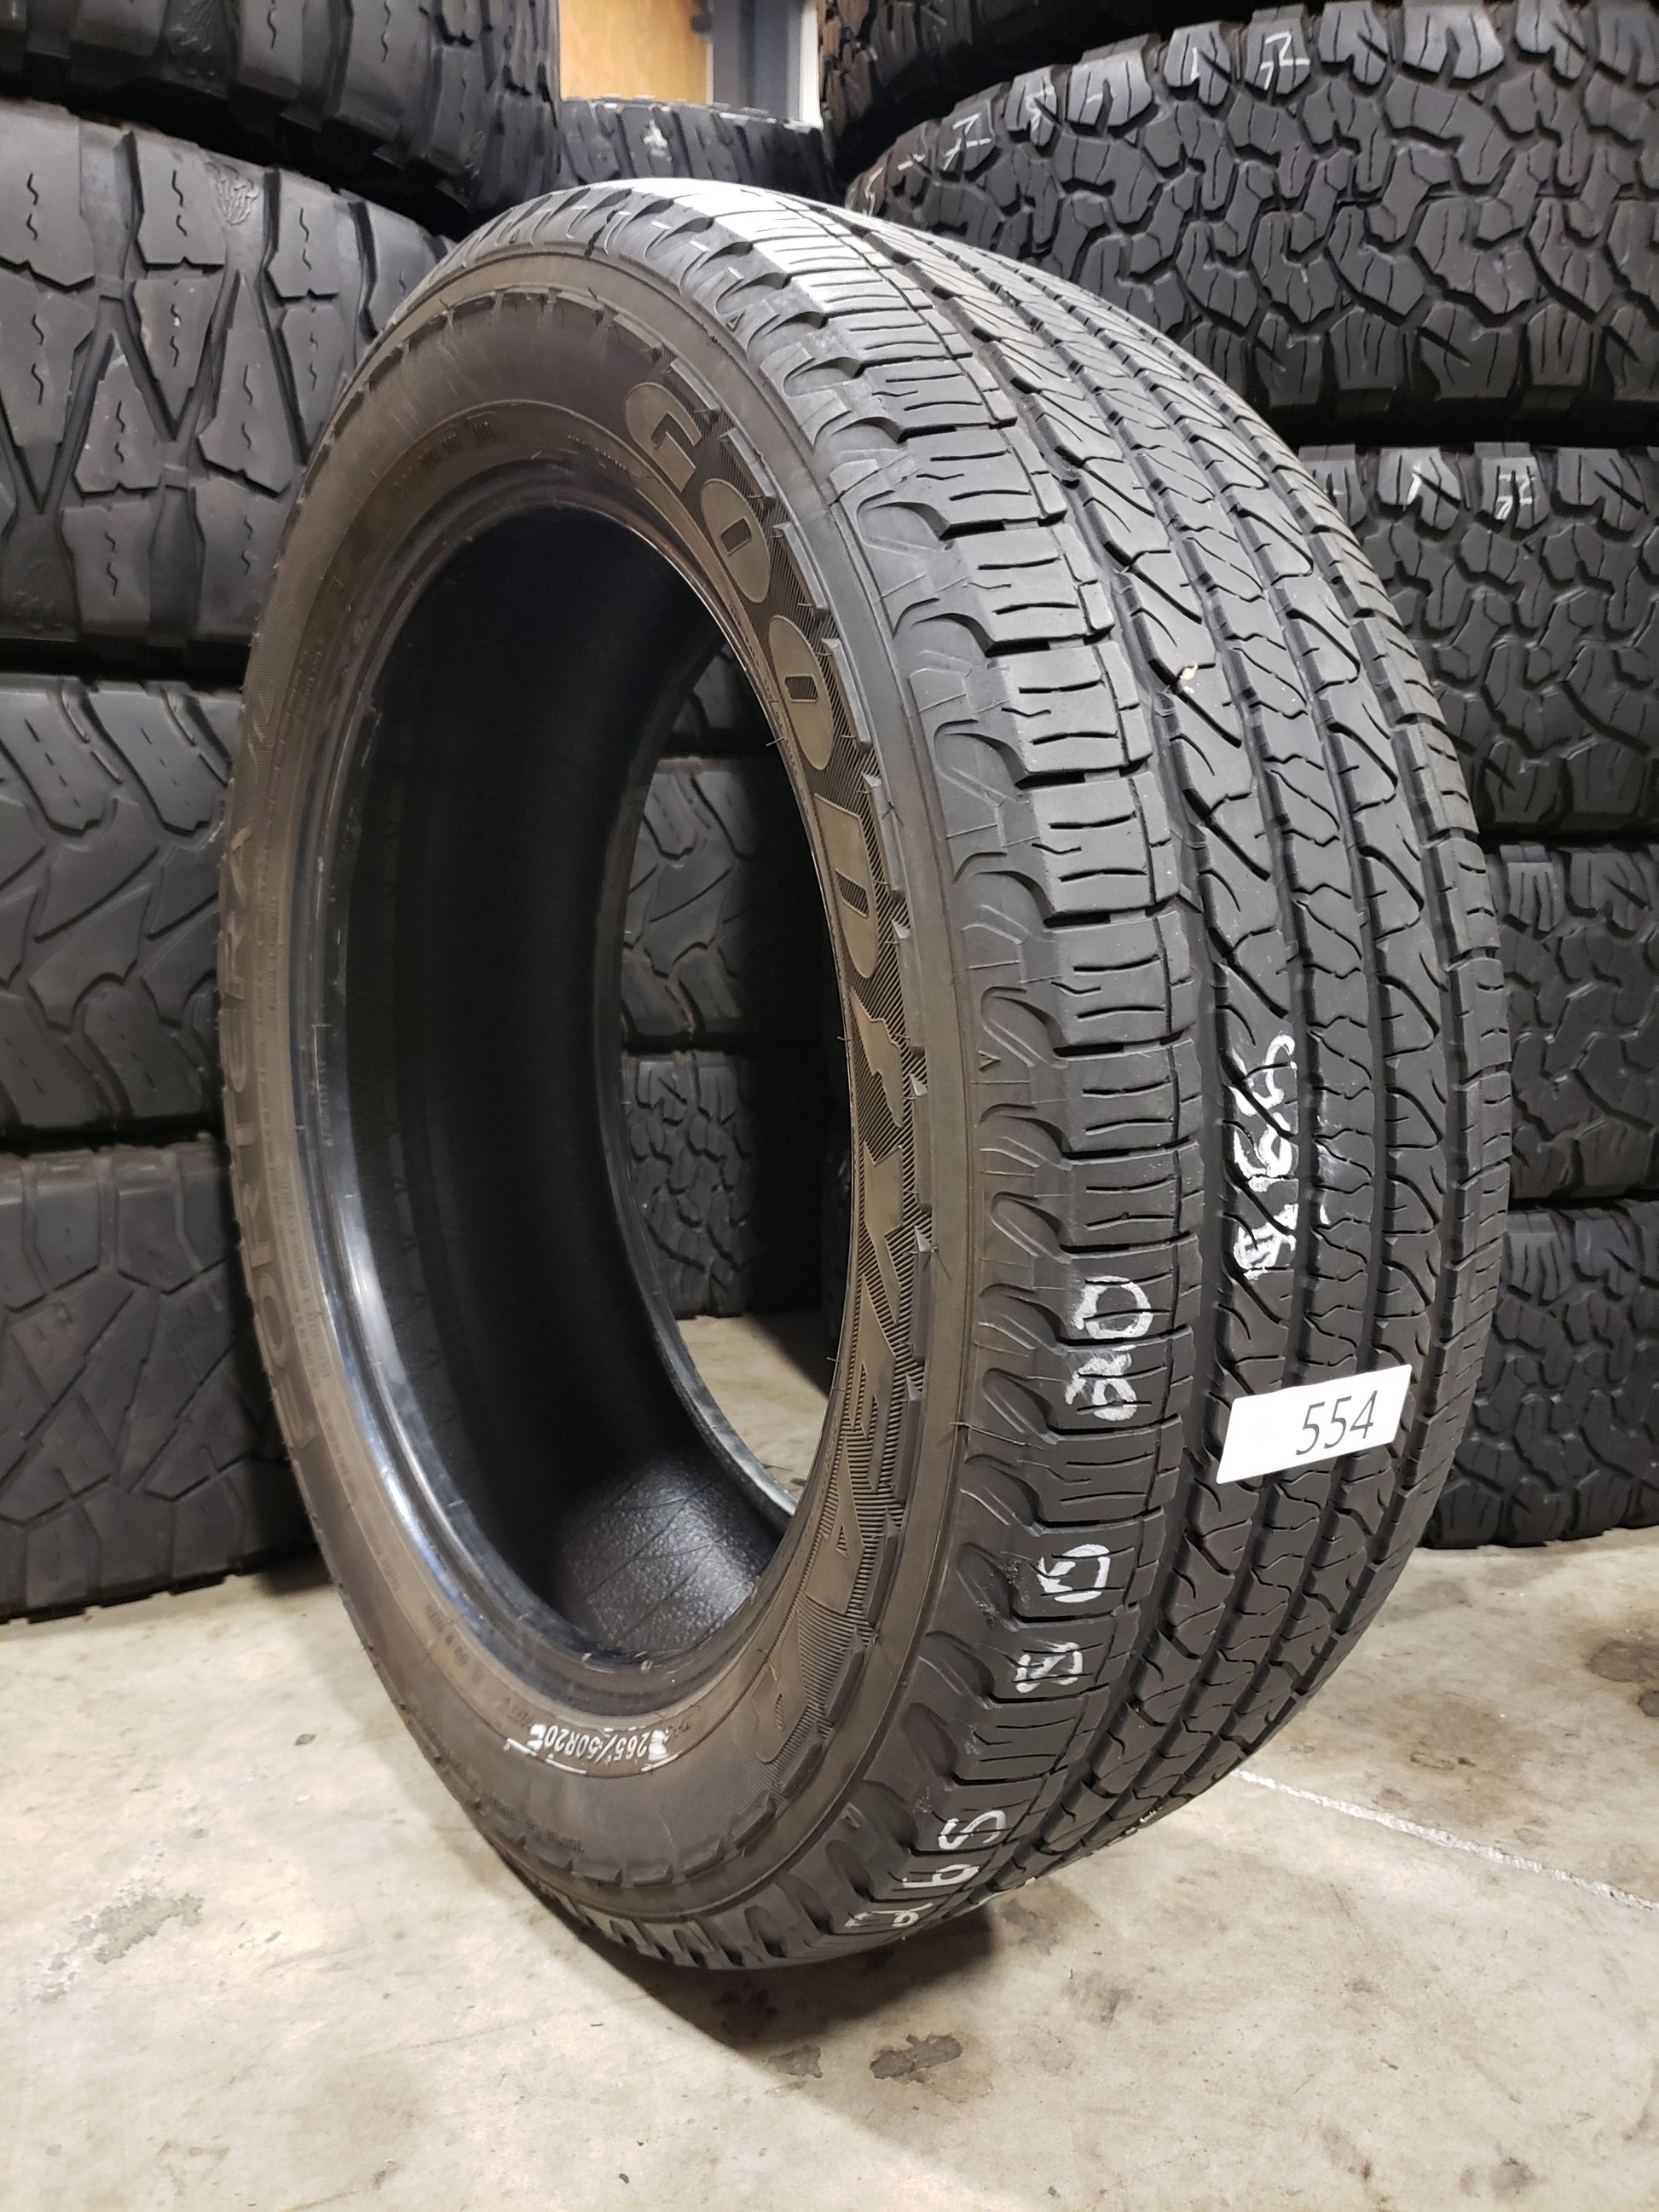 SINGLE 245/50R20 Goodyear Fortera HL 107 T SL - Used Tires – High Tread  Used Tires